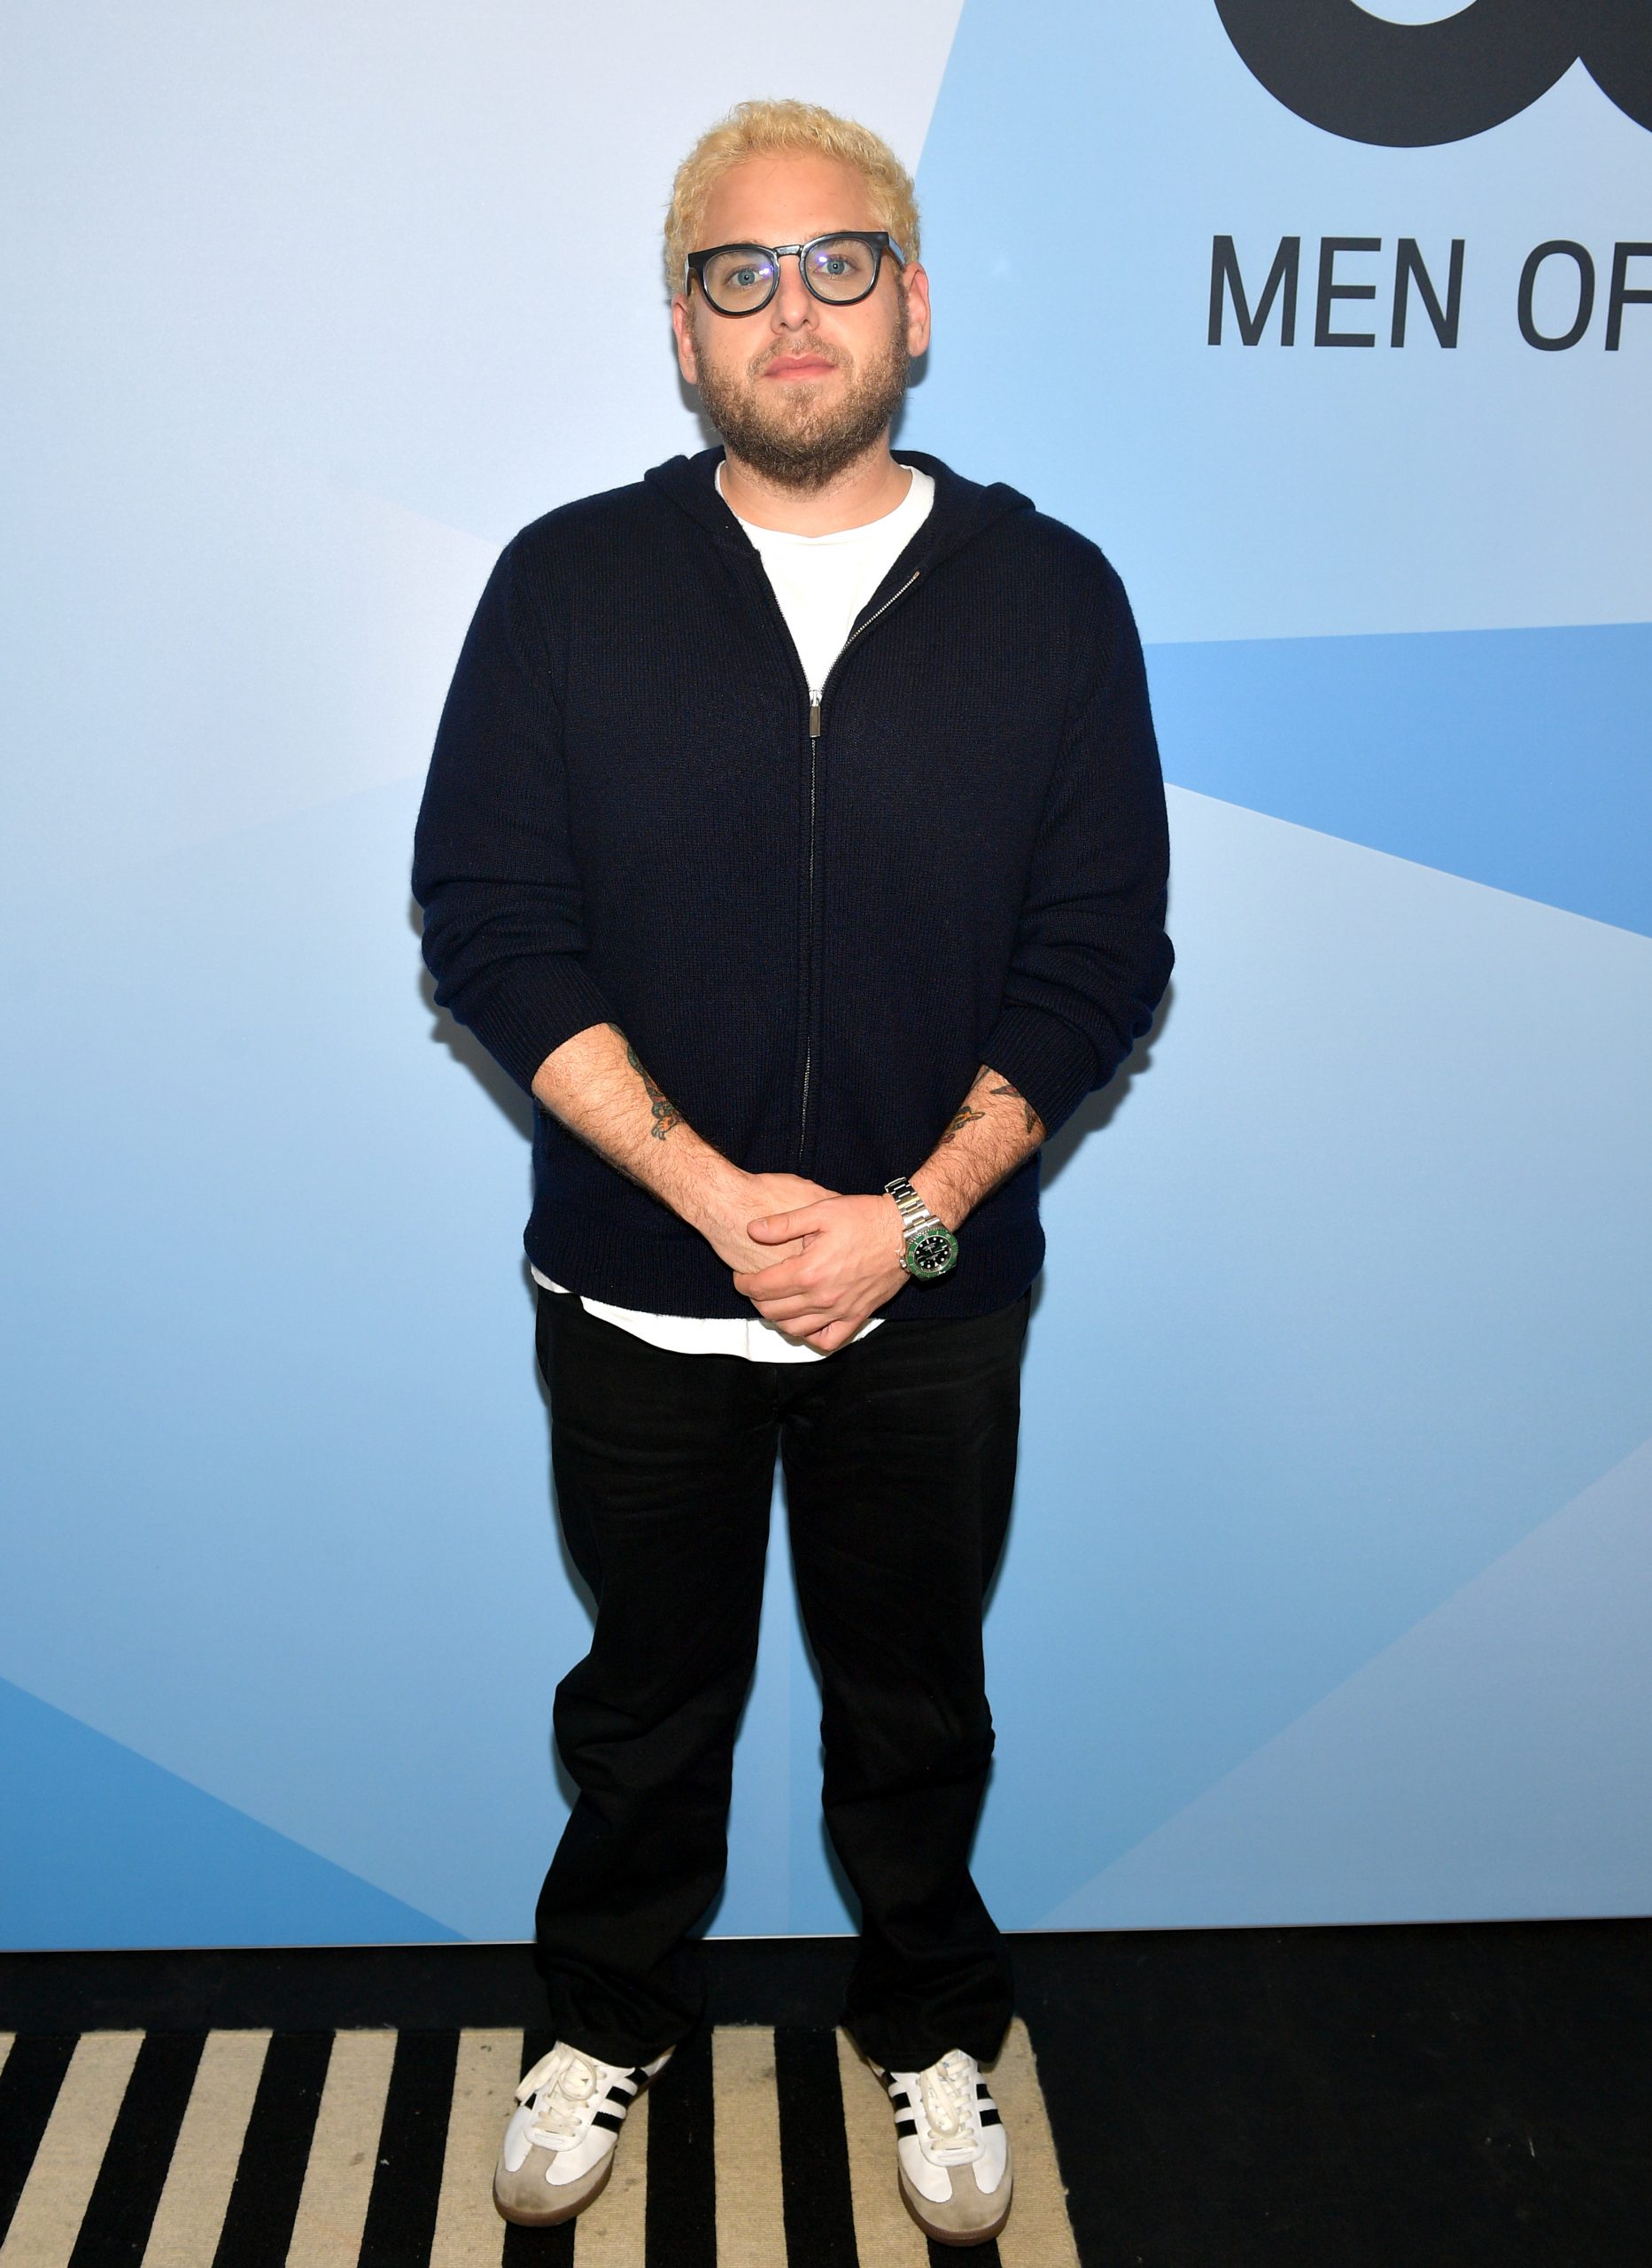 Jonah Hill in Los Angeles on Dec. 7, 2018. (Photo by Matt Winkelmeyer/Getty Images for GQ)